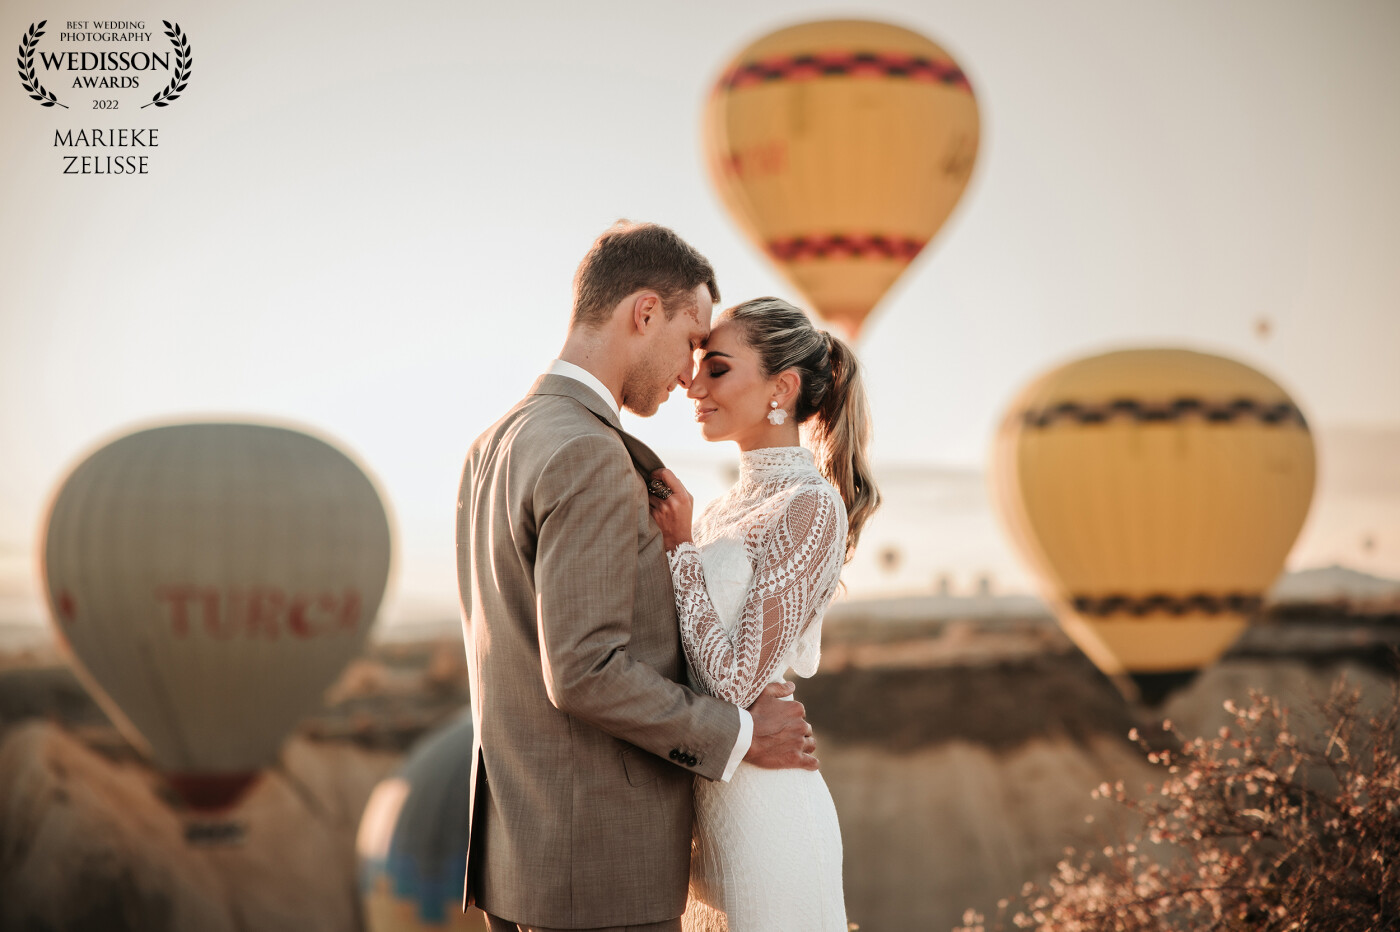 In Cappadocia every morning 165 balloons color the air with the sun going up. This is stunning to see and to capture a beautiful couple is even more stunning!